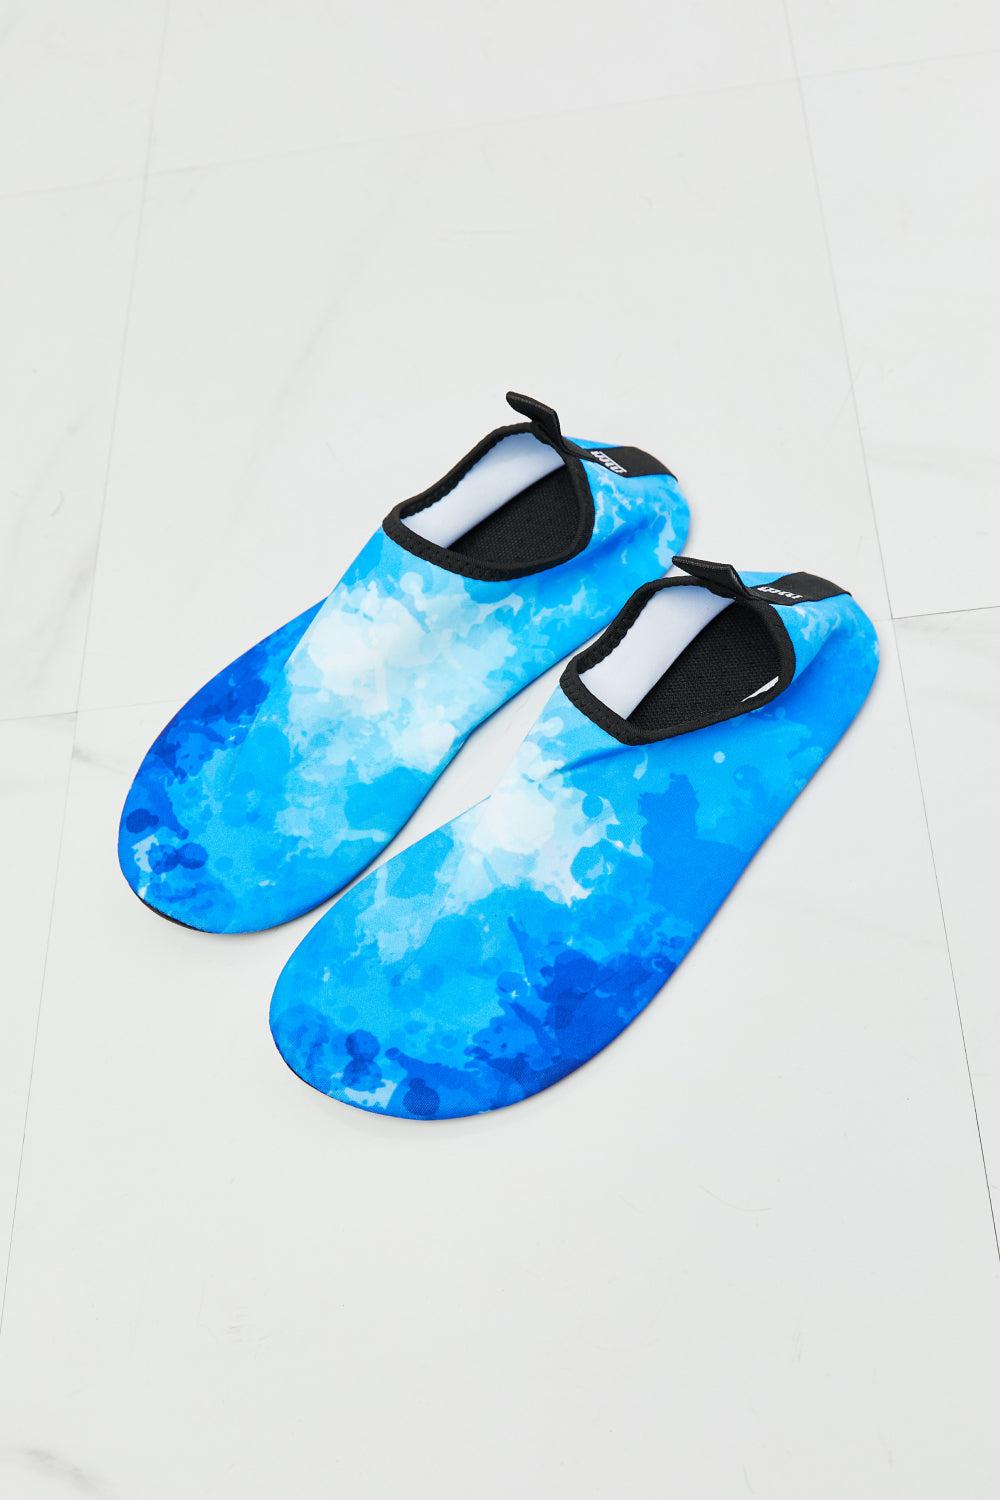 MMshoes On The Shore Water Shoes in Blue BLUE ZONE PLANET